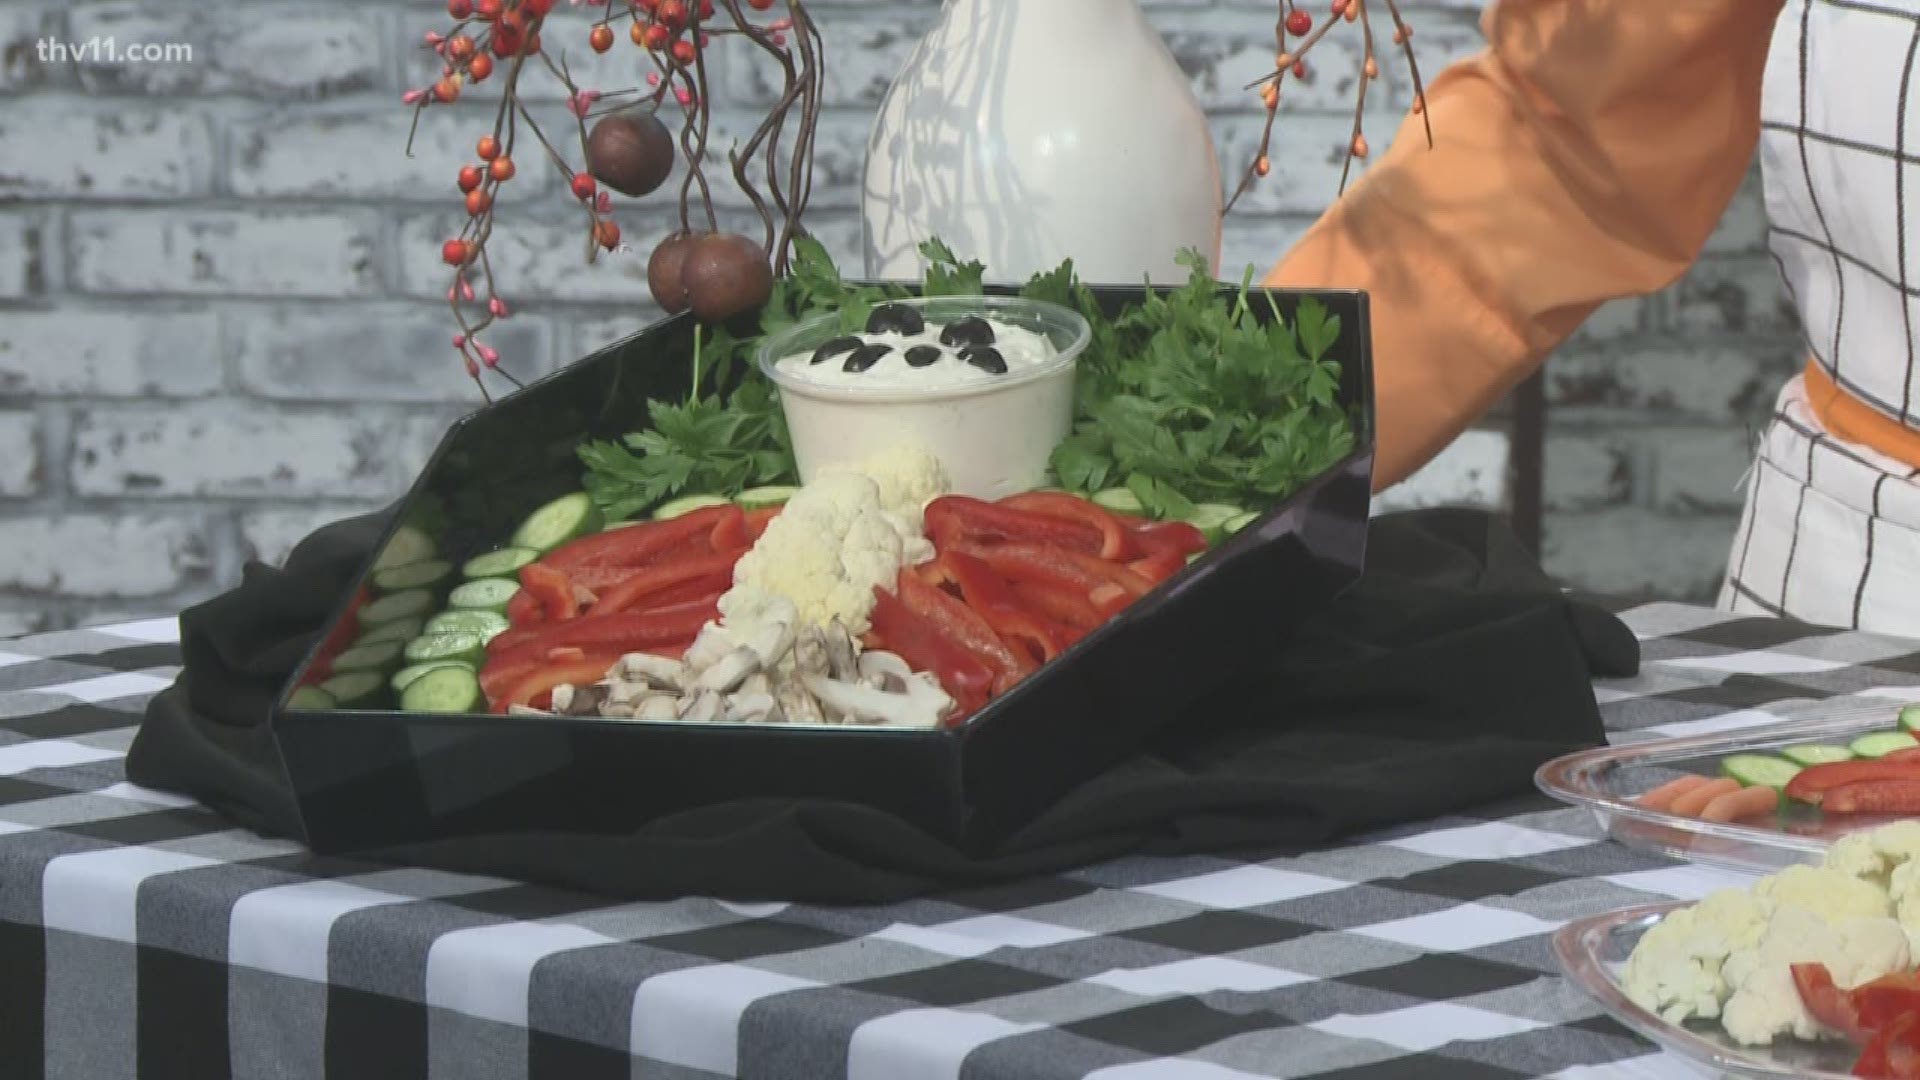 We've got Debbie Arnold here with us this morning and she's making a Halloween treat. We're making skeleton vegetable boards.